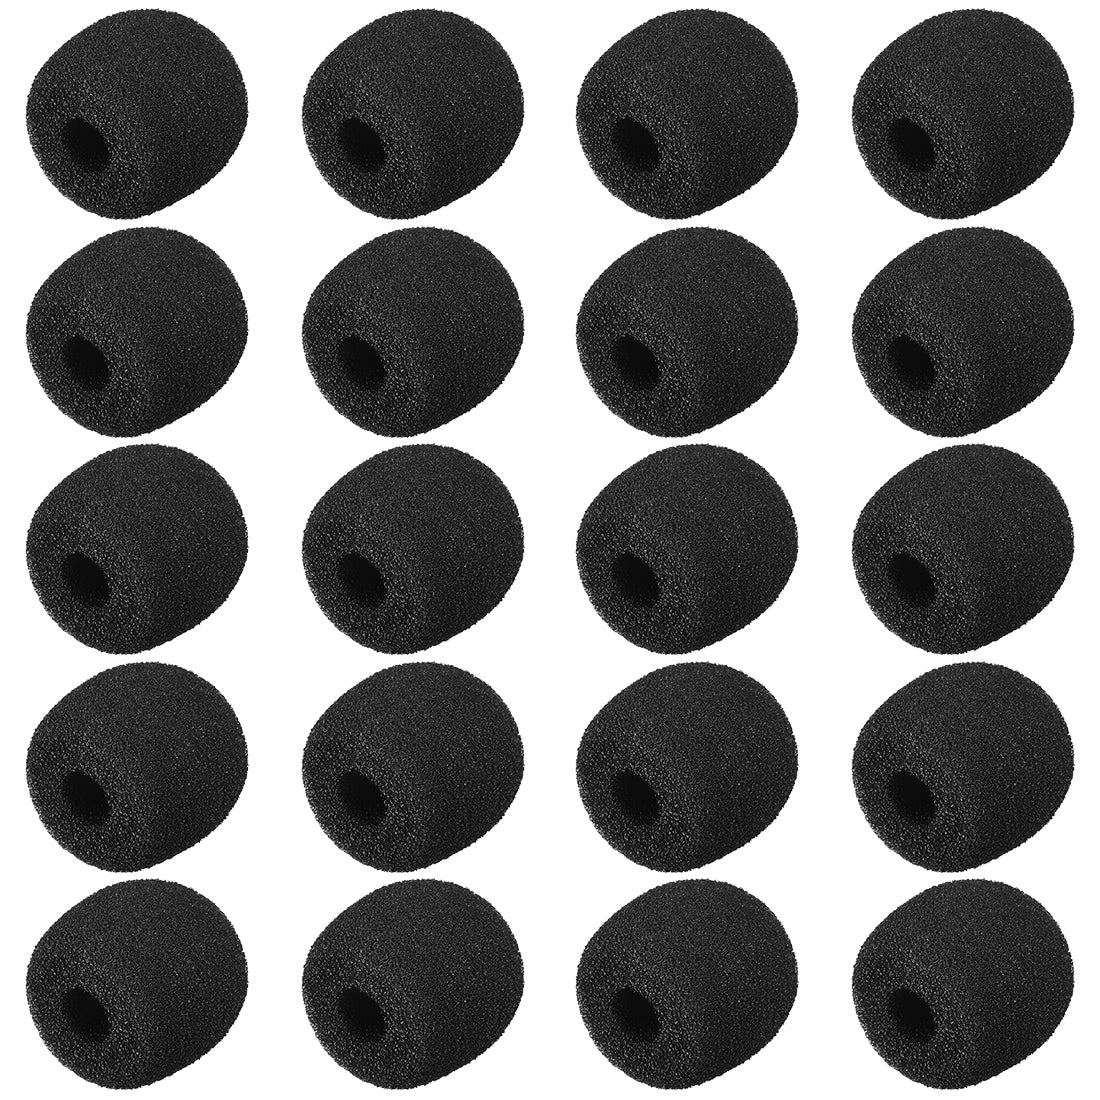 uxcell Uxcell 20PCS Foam Mic Cover Headset Microphone Windscreen Shield Protection 26mm Length for Headset Lapel Lavalier